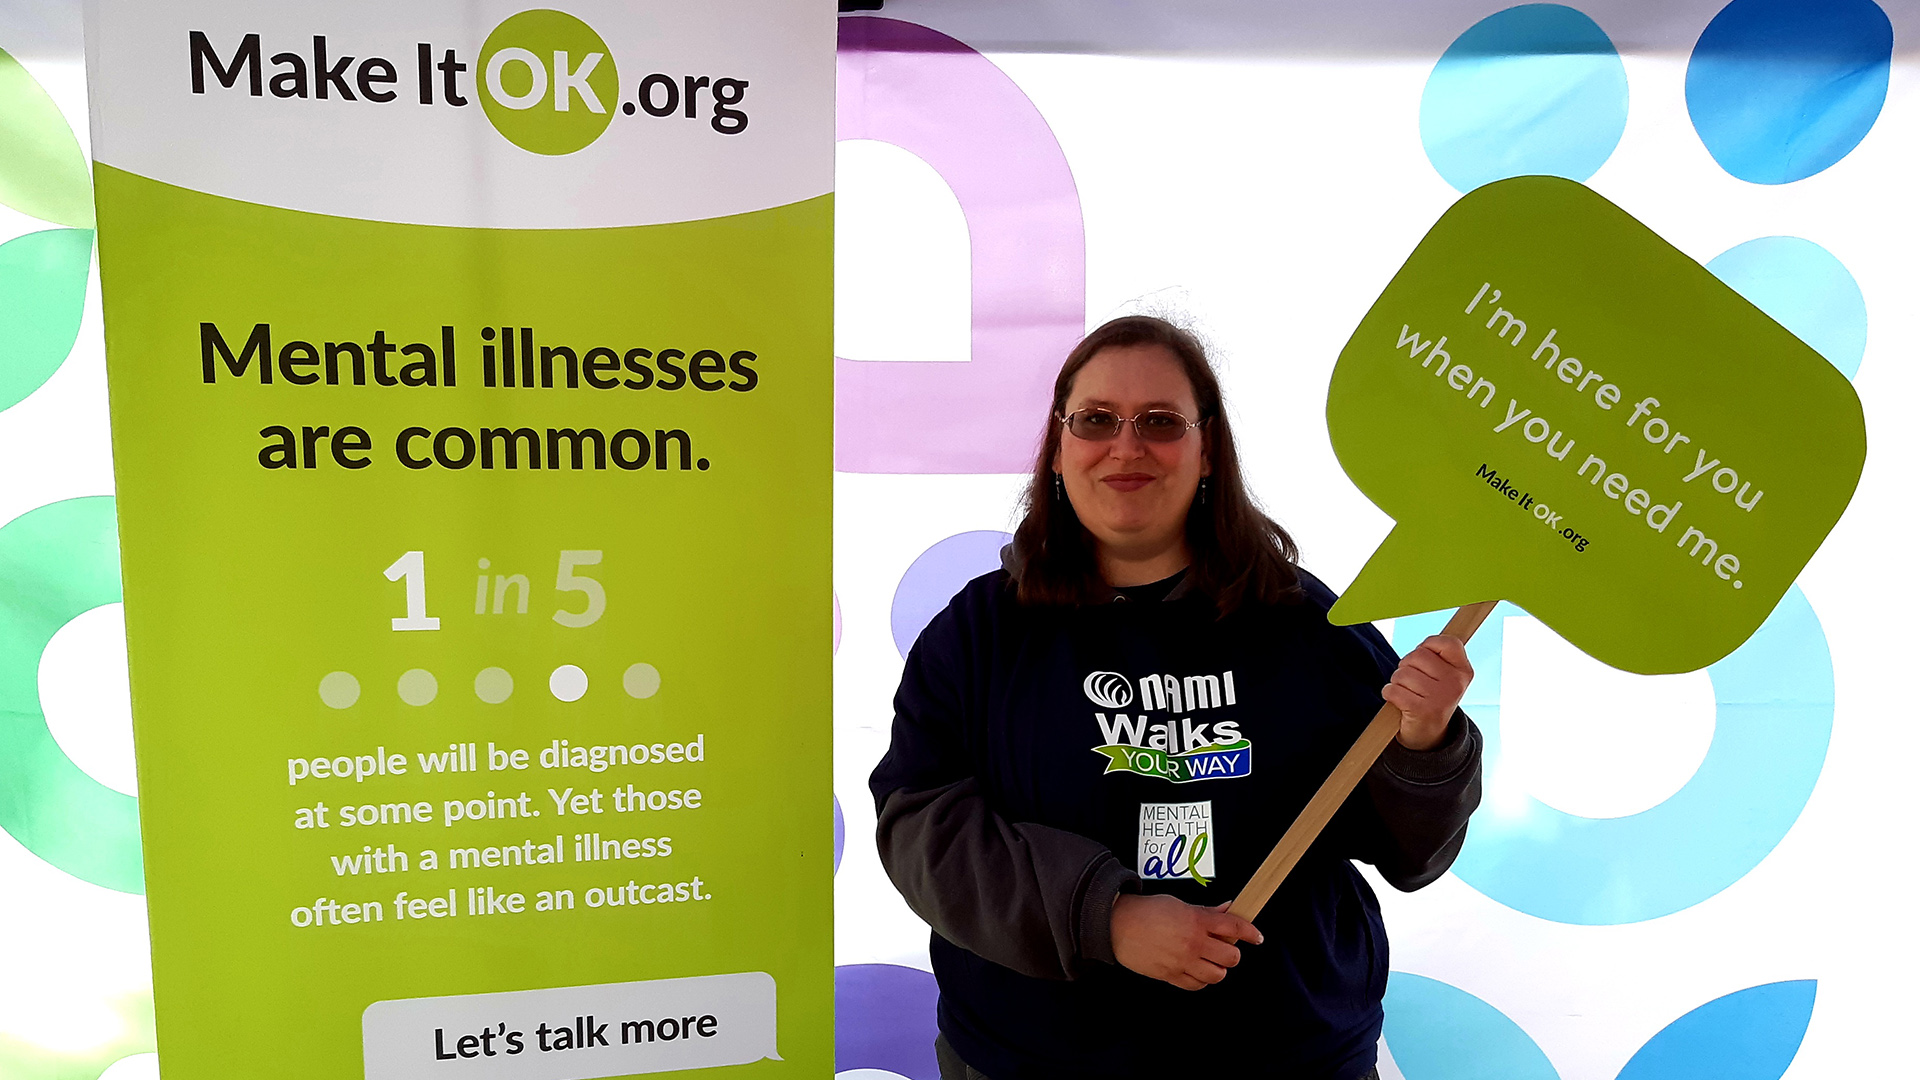 Chrissy Barnard holds a sign in the shape of a word bubble reading "I'm here for you when you need me." and the URL makeitok.org while standing next to a banner sign with the same URL, the words "Mental illnesses are common." in large type and other details about the issue.